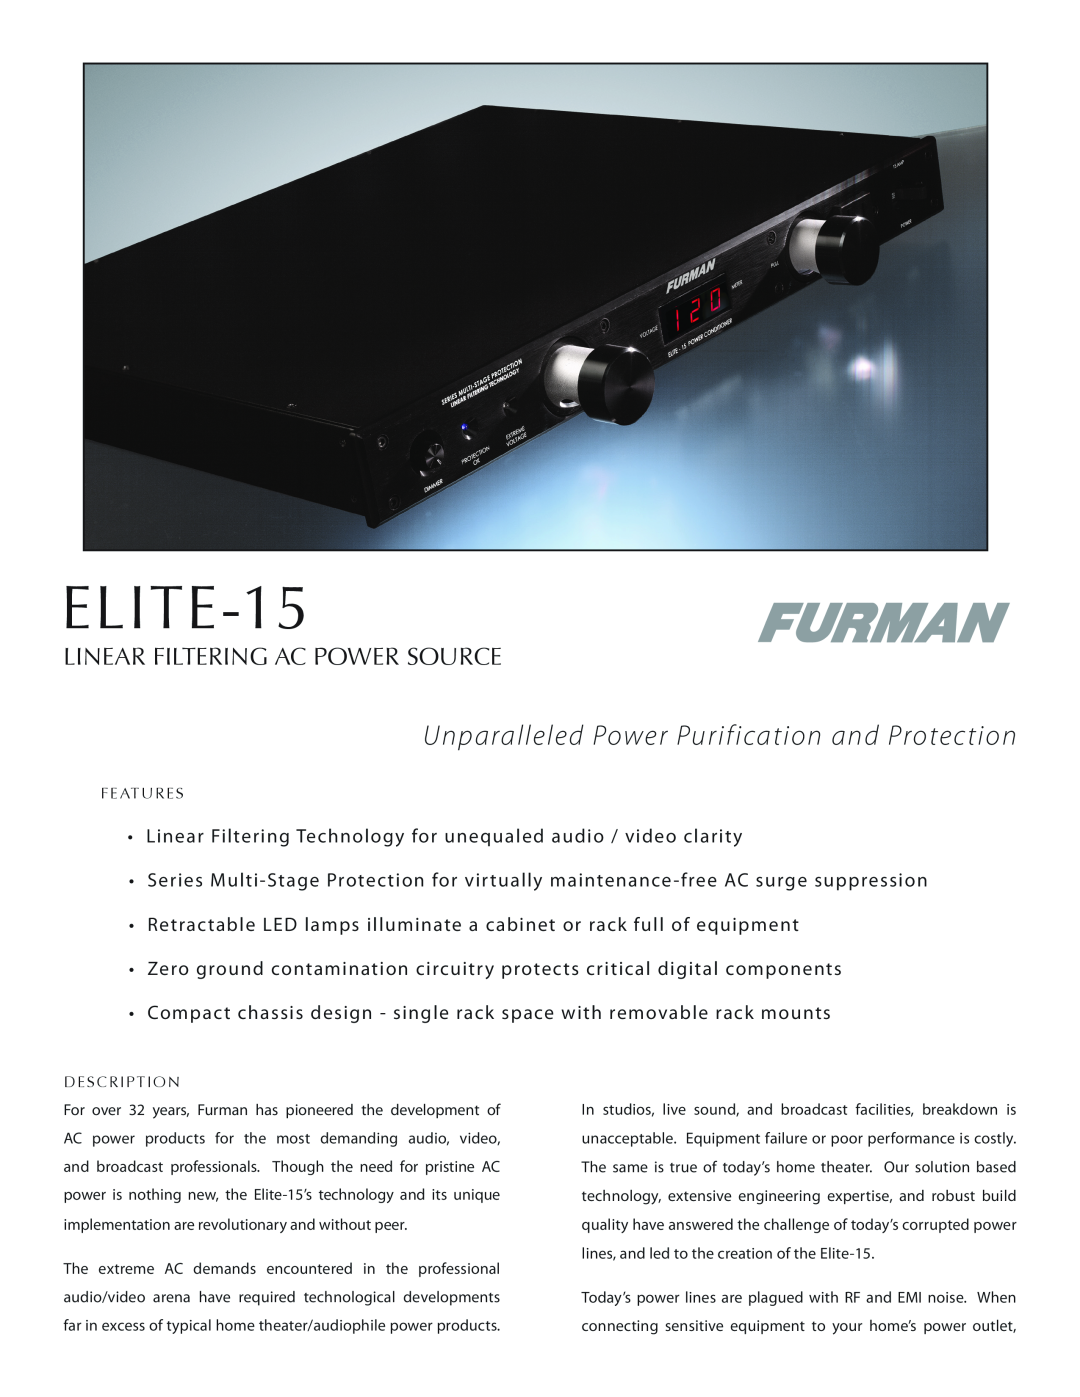 Furman Sound Elite-15 manual ELITE-15, Unparalleled Power Purification and Protection, Linear Filtering Ac Power Source 